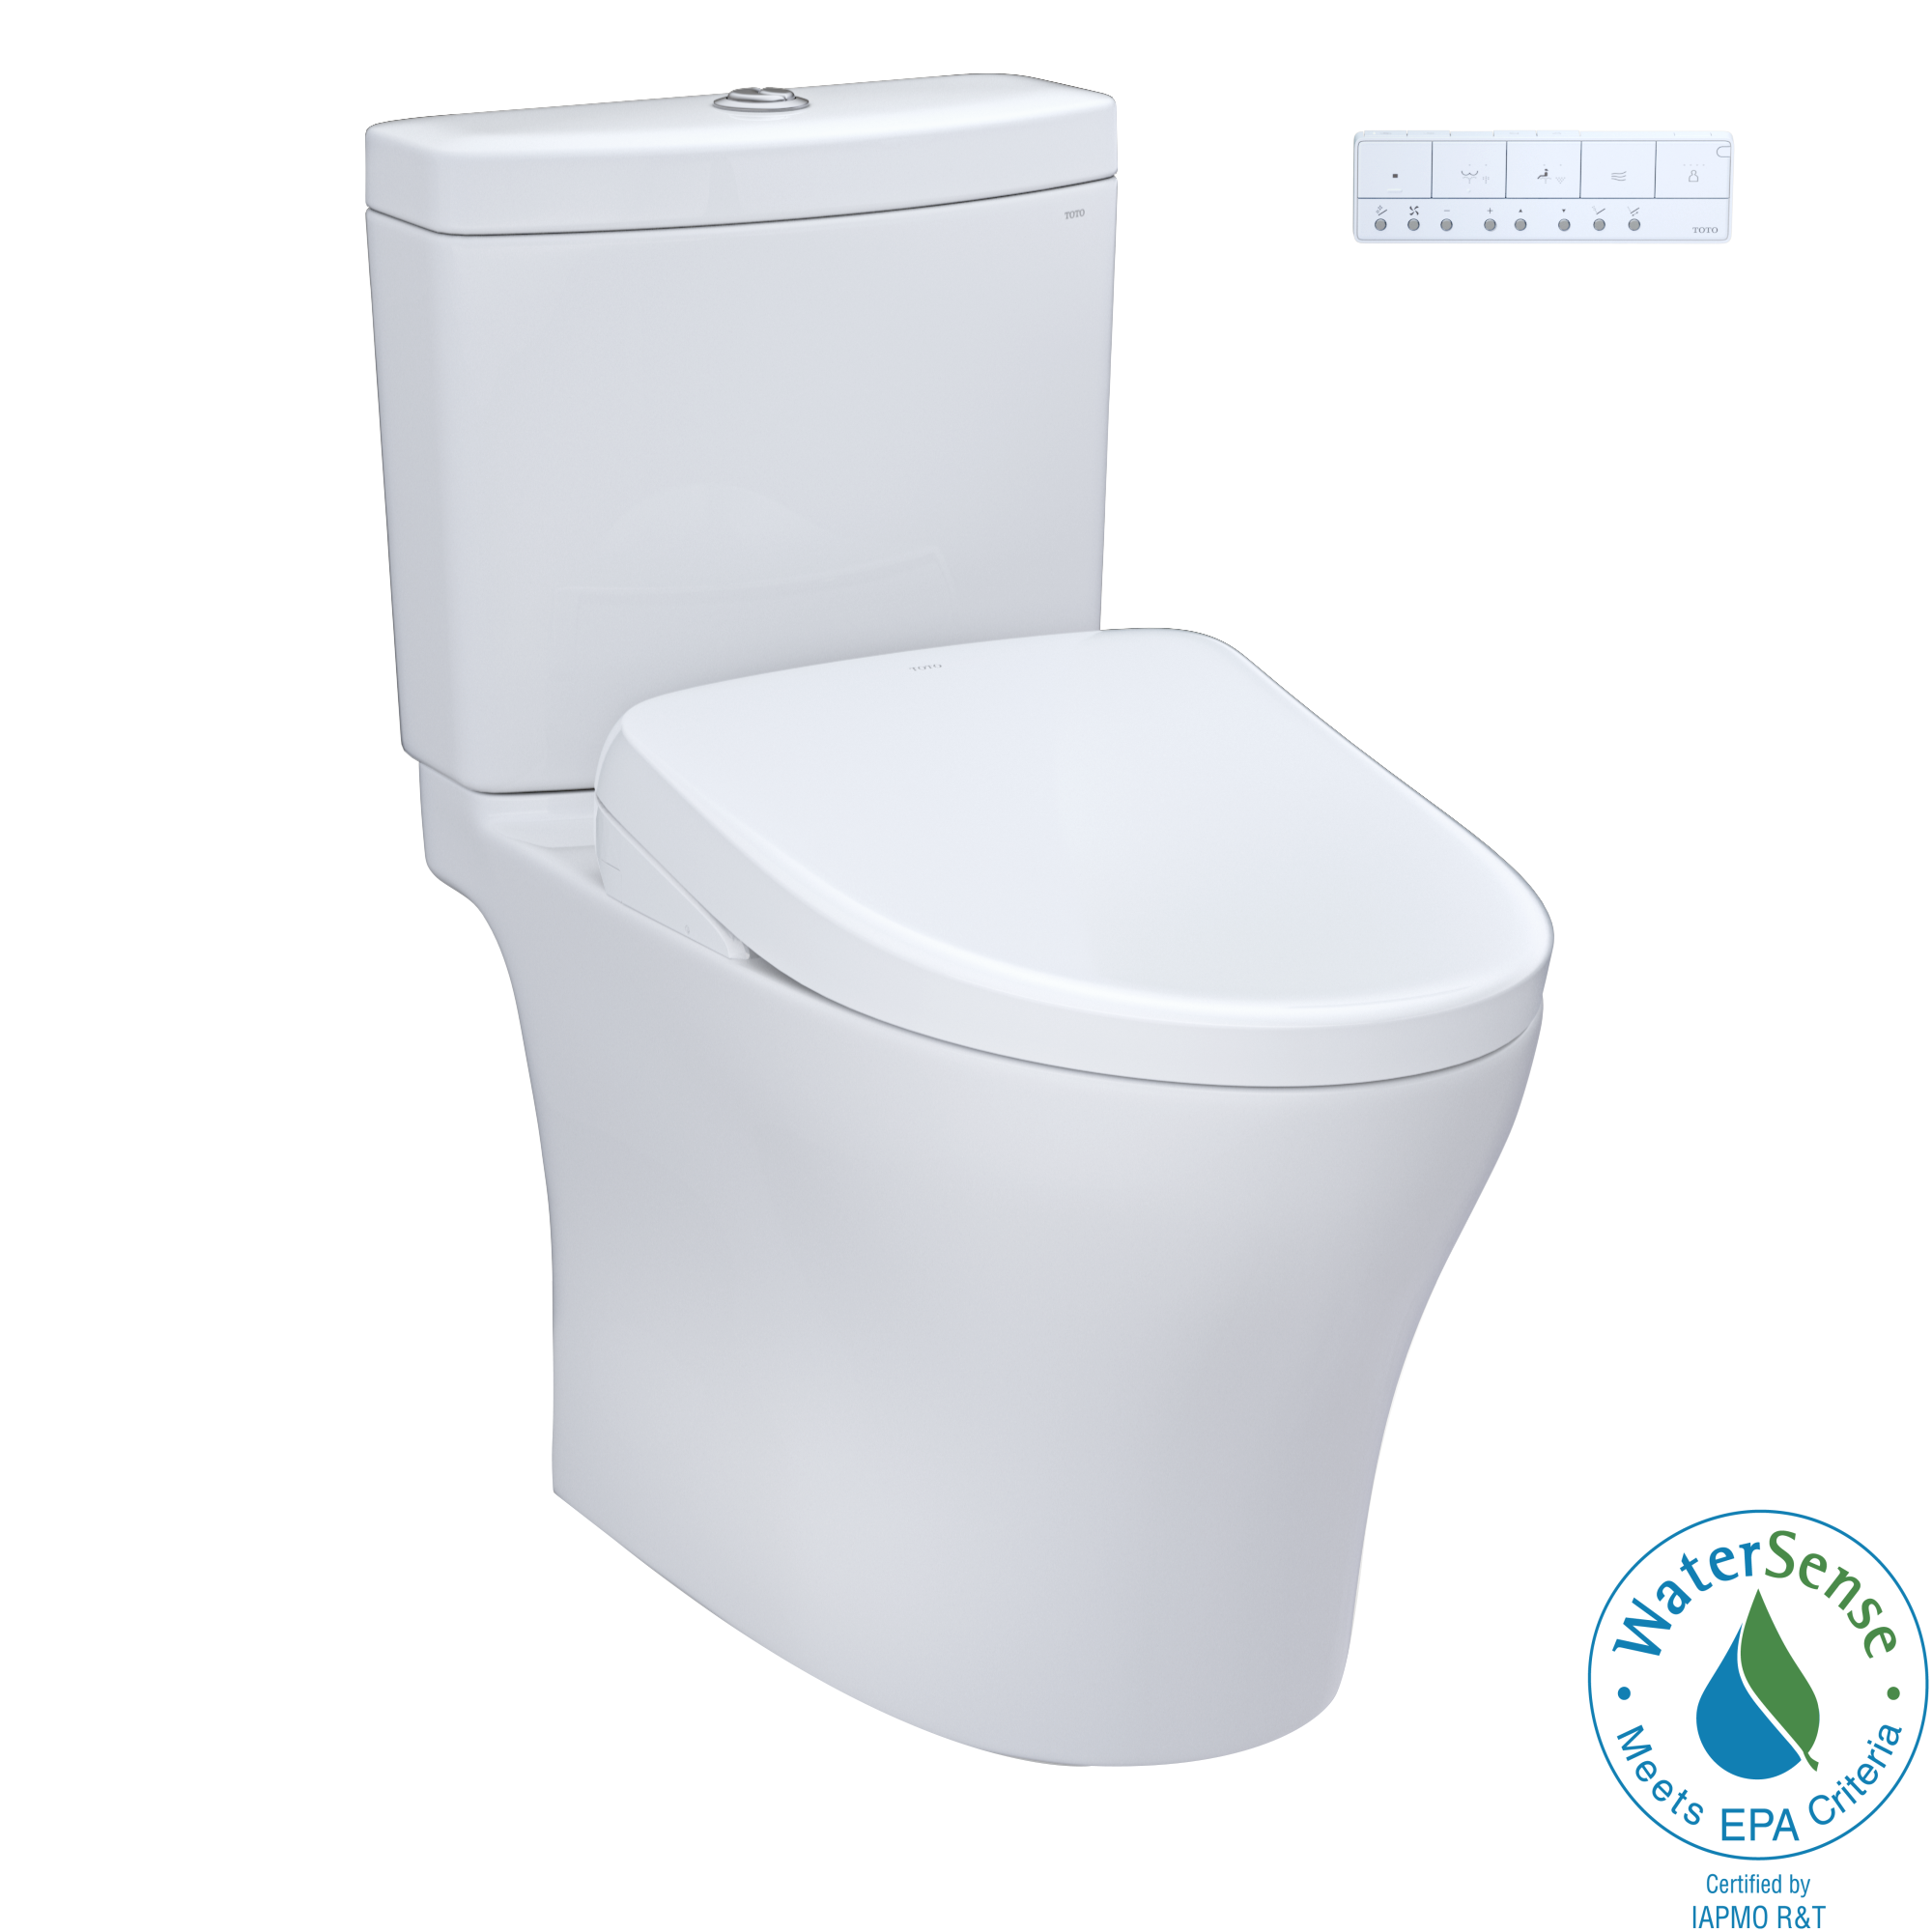 TOTO WASHLET+ Aquia IV Two-Piece Elongated Dual Flush 1.28 and 0.9 GPF Toilet with S7A Contemporary Bidet Seat, Cotton White - MW4464736CEMFGN#01, MW4464736CEMFGNA#01